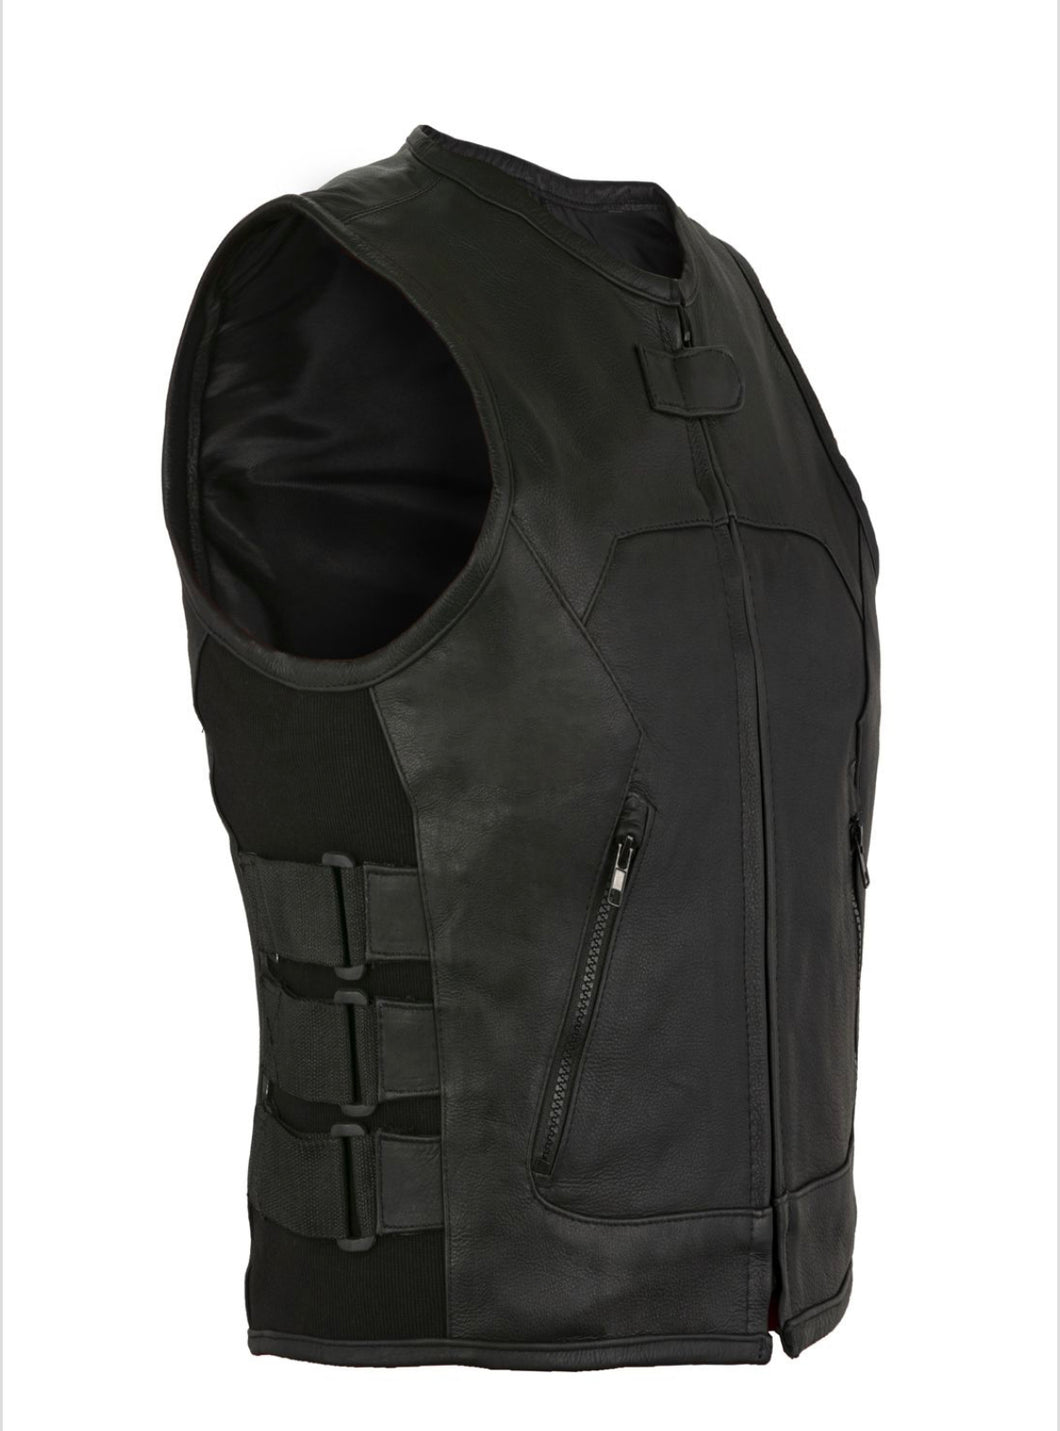 Ladies Leather Tactical Vest with 3 Adjustable Straps